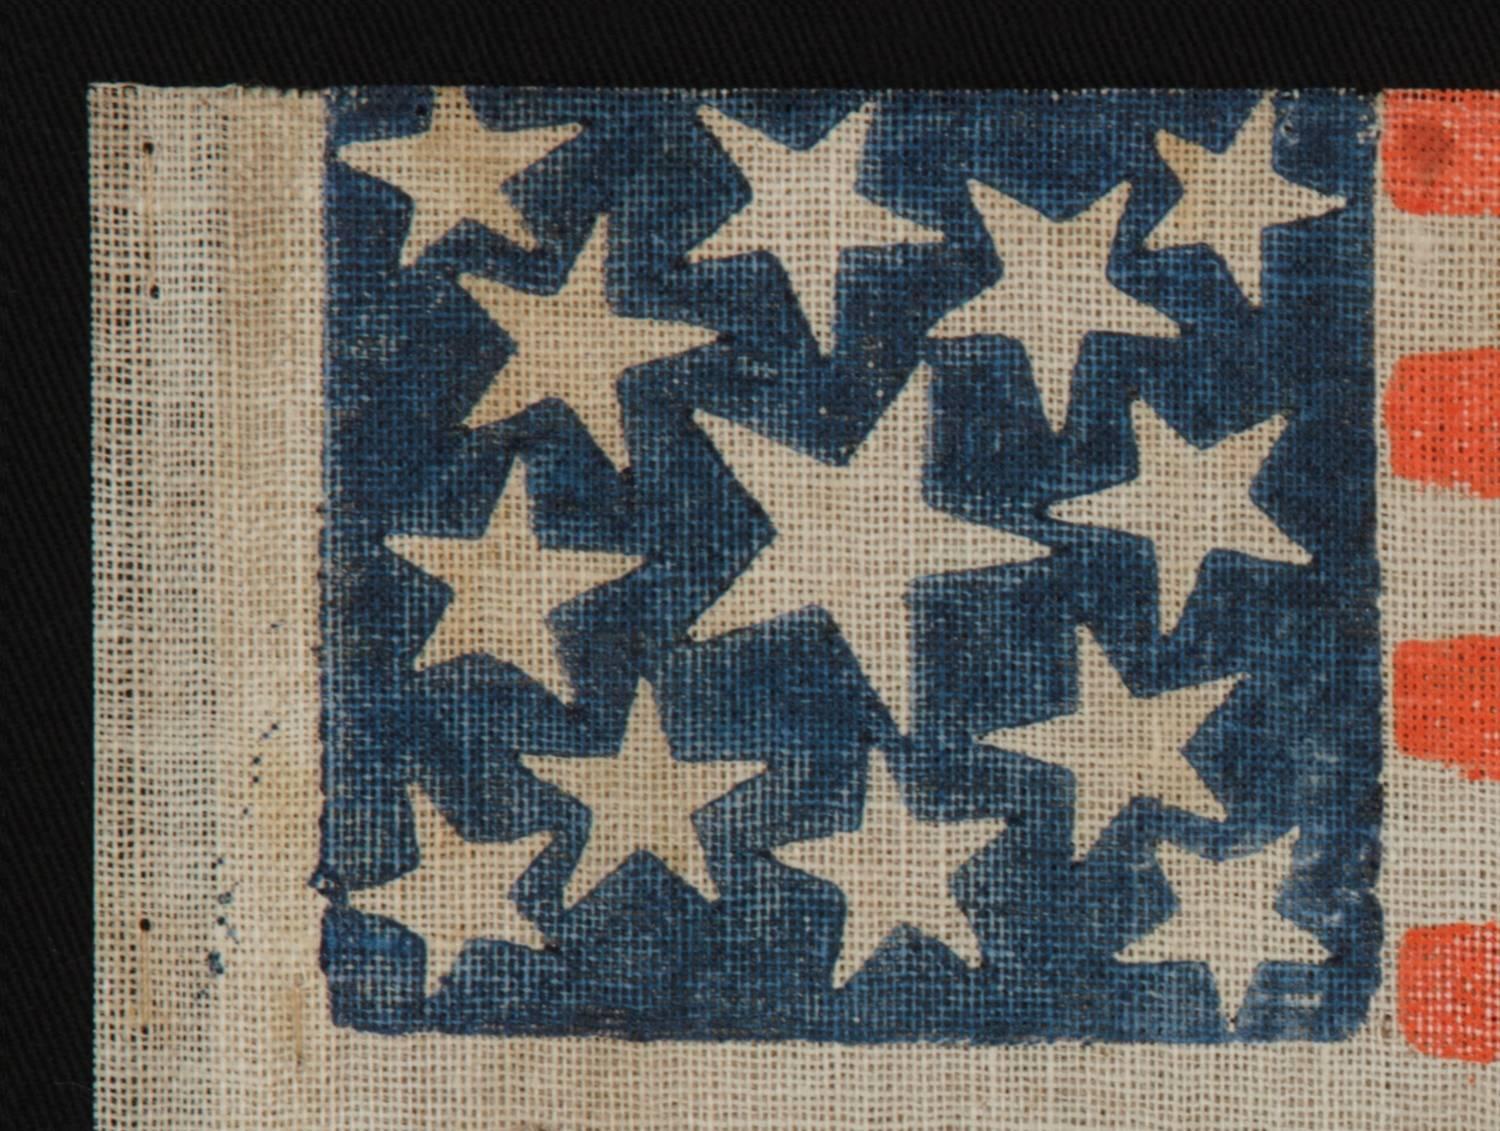 American 13 Star Parade Flag with Stars in a Medallion Pattern